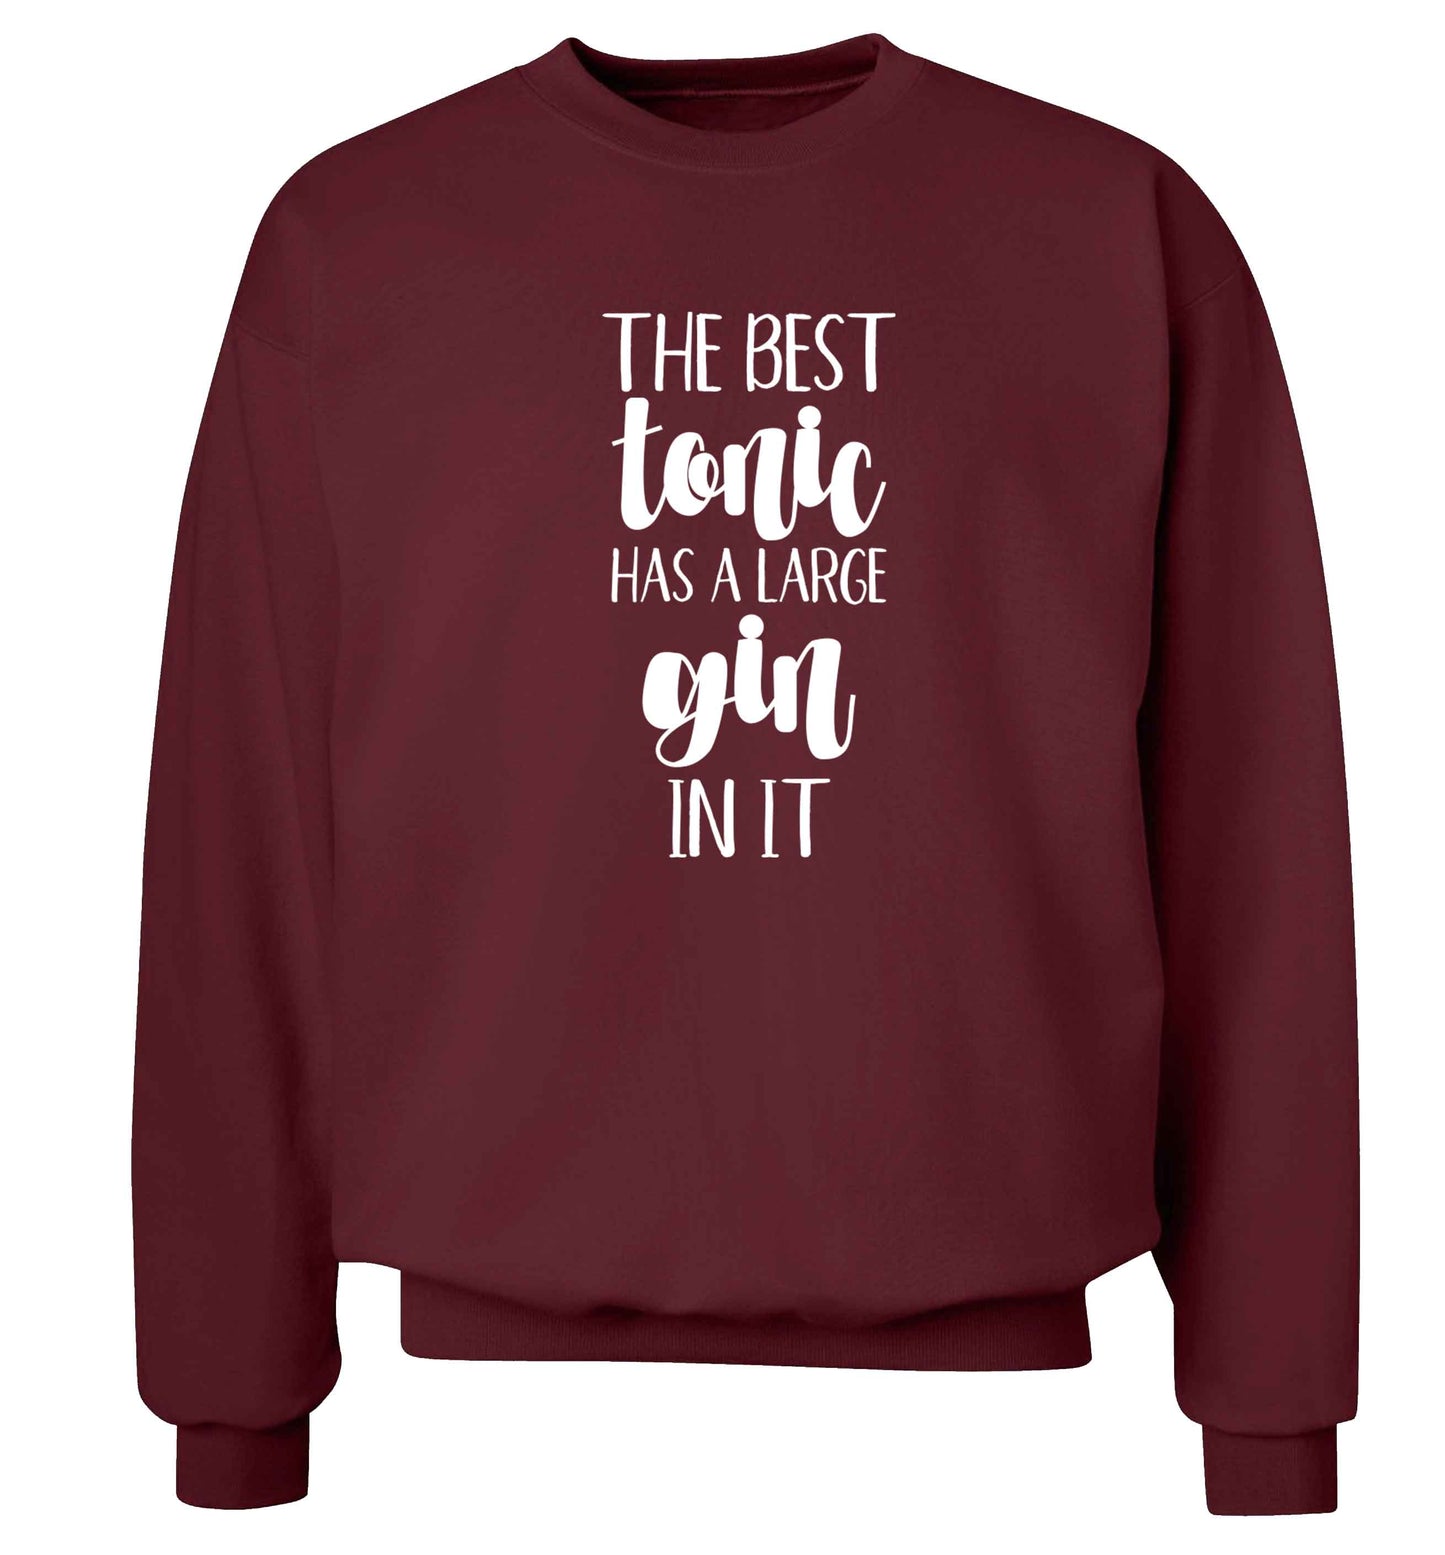 The best tonic has a large gin in it Adult's unisex maroon Sweater 2XL